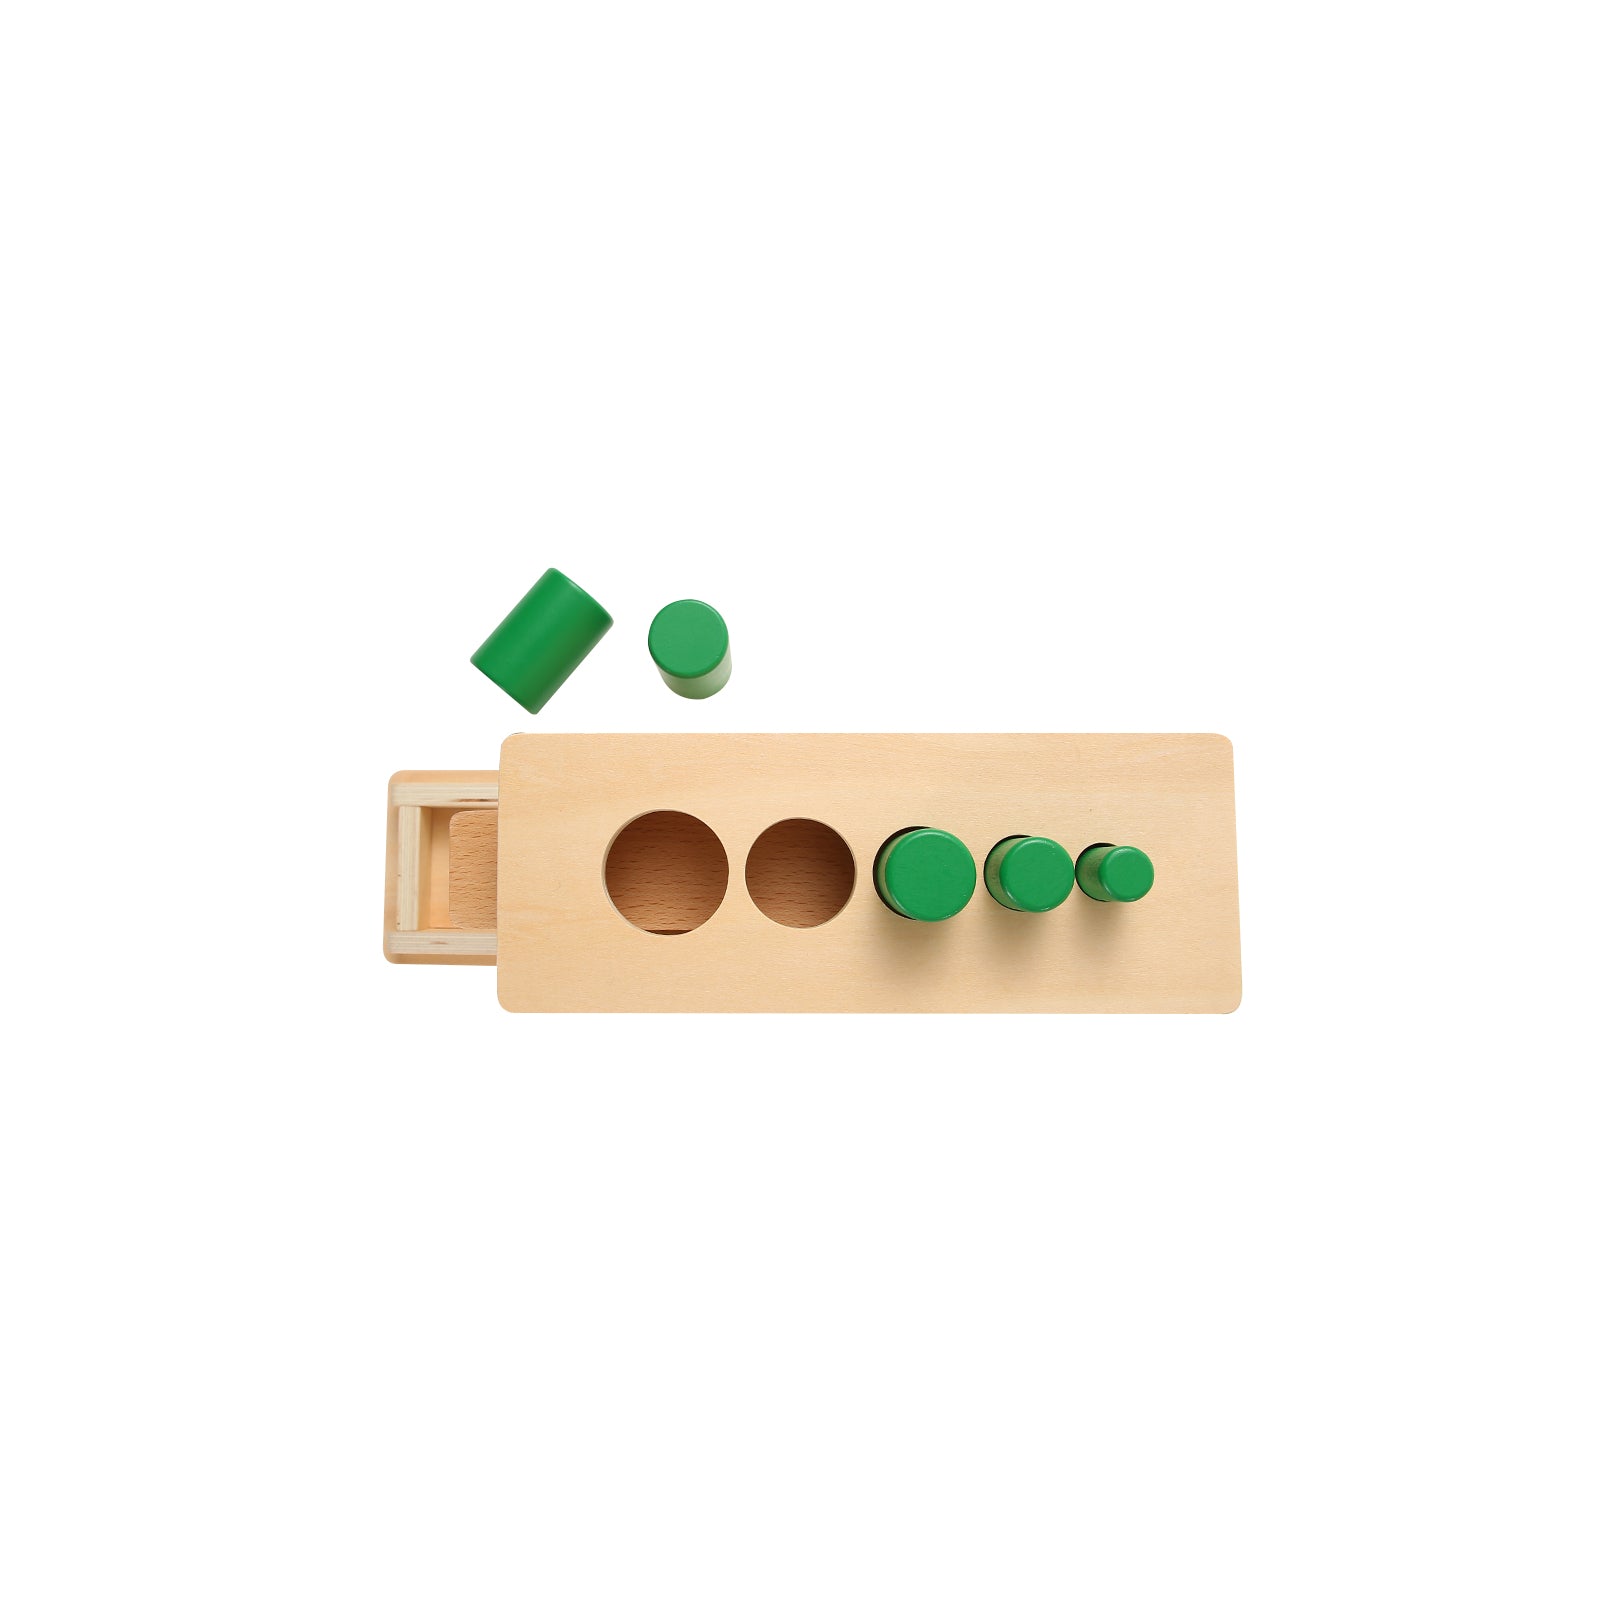 Montessori plug-in game cylinder, plug-in box for five different cylinders, wooden toys, Montessori sensory material